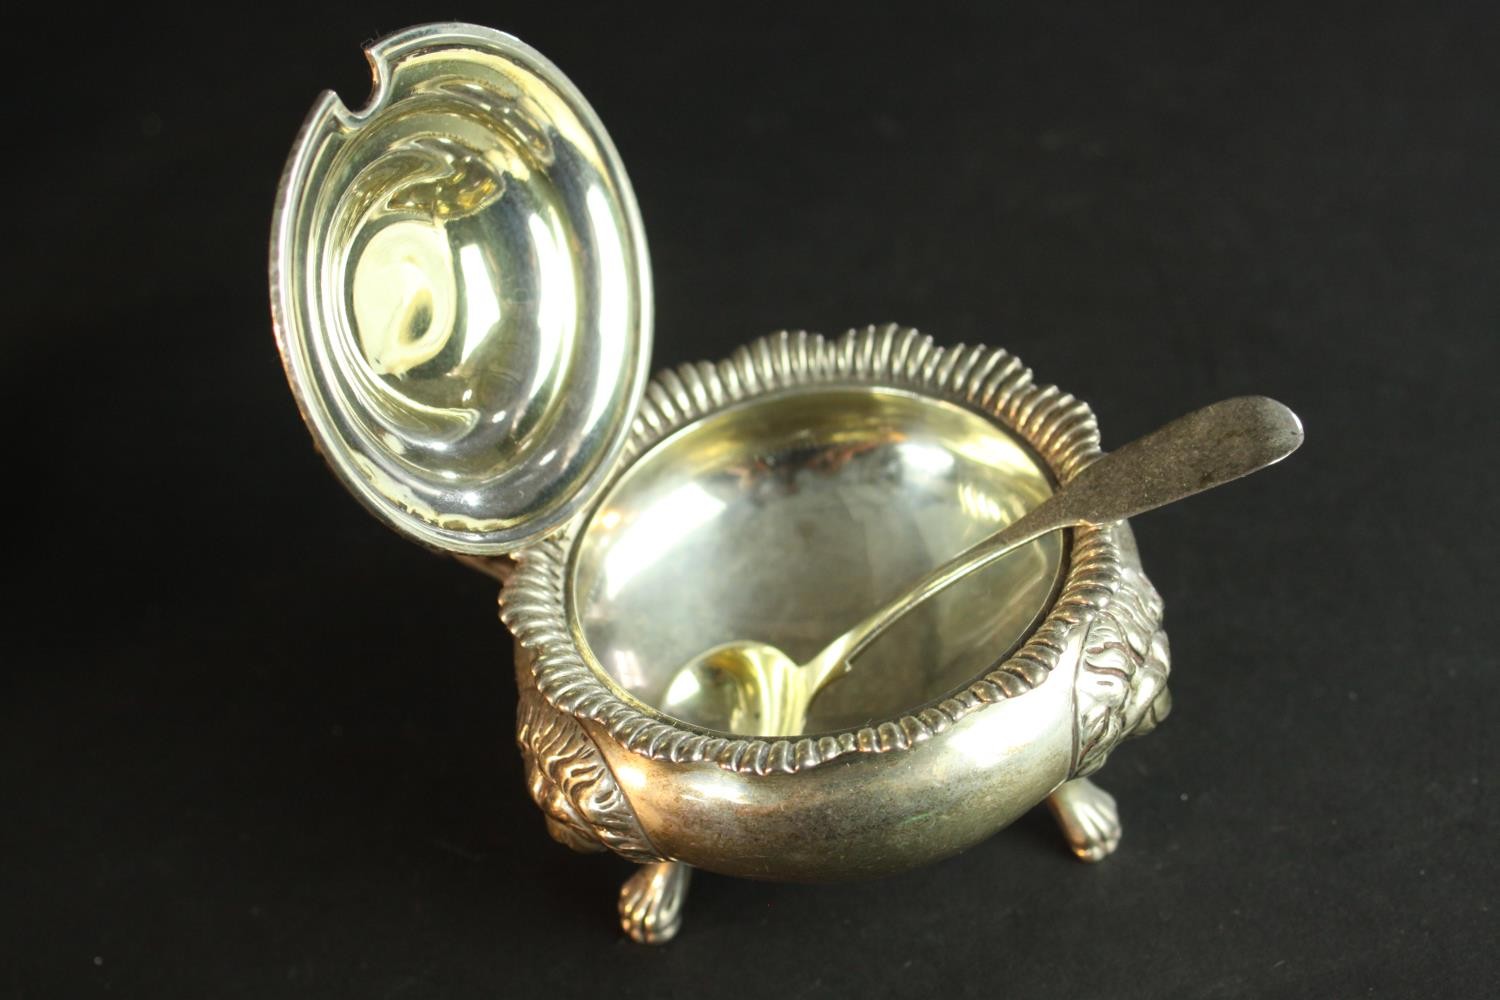 Six 19th and 20th century sterling silver hinged lid mustard pots, various designs, makers and assay - Image 10 of 15